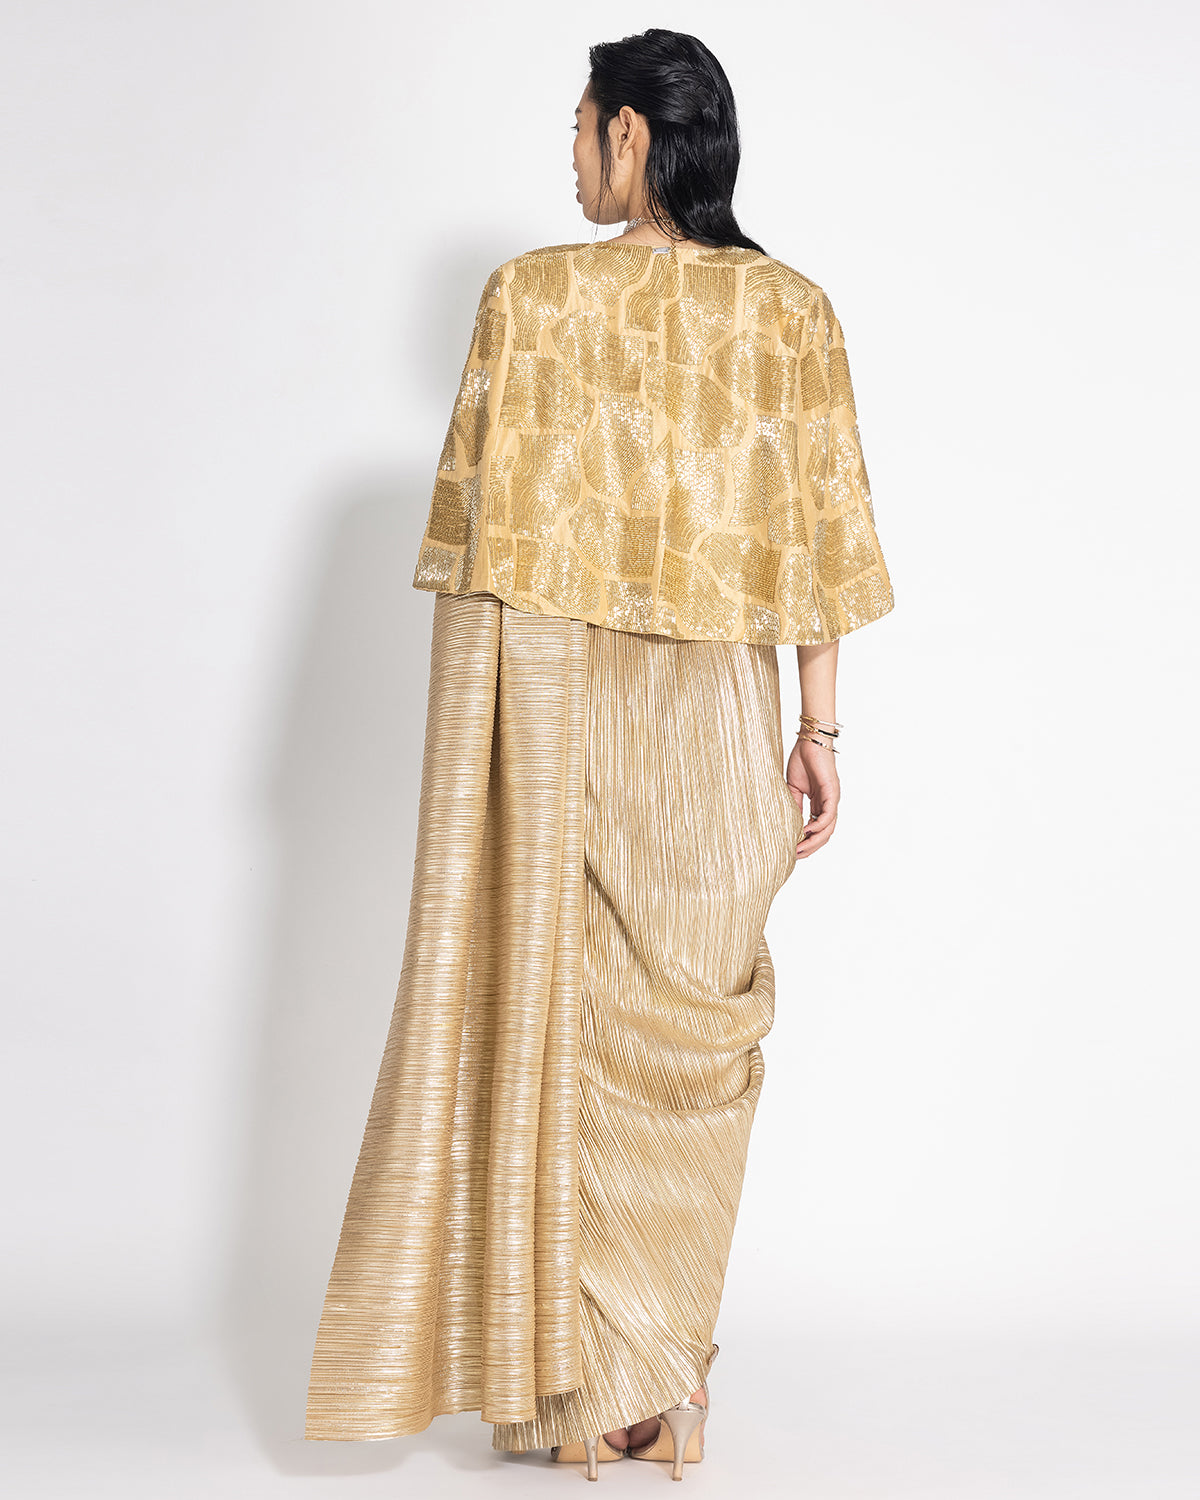 Metallic 2.0 Sari With Milkyway Crossover Top and Wave Cape